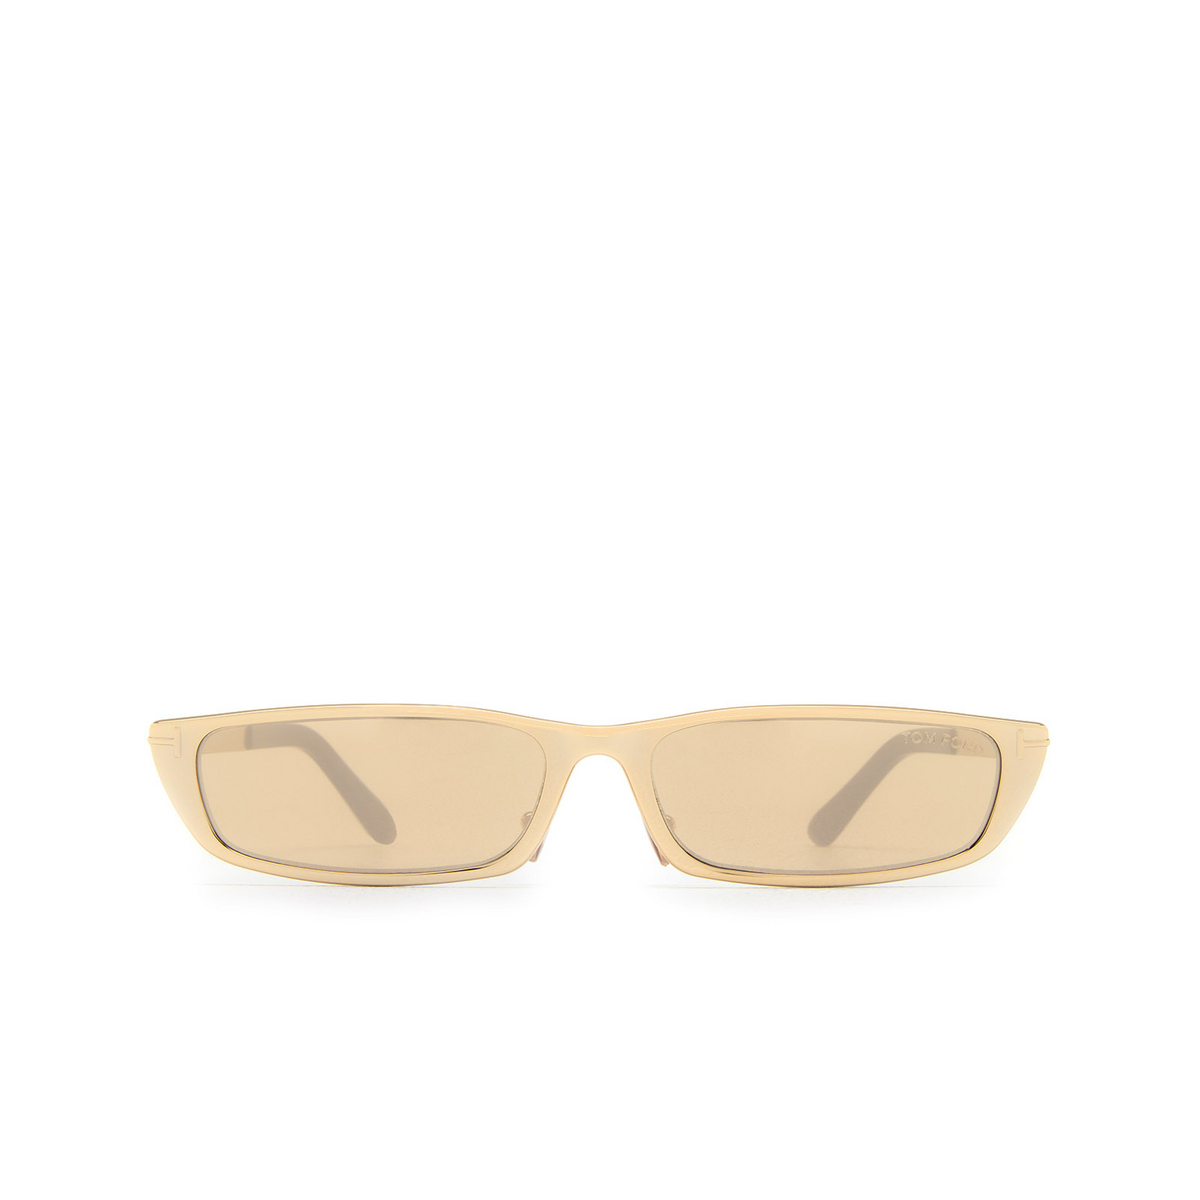 Tom Ford EVERETT Sunglasses 32G Gold - front view